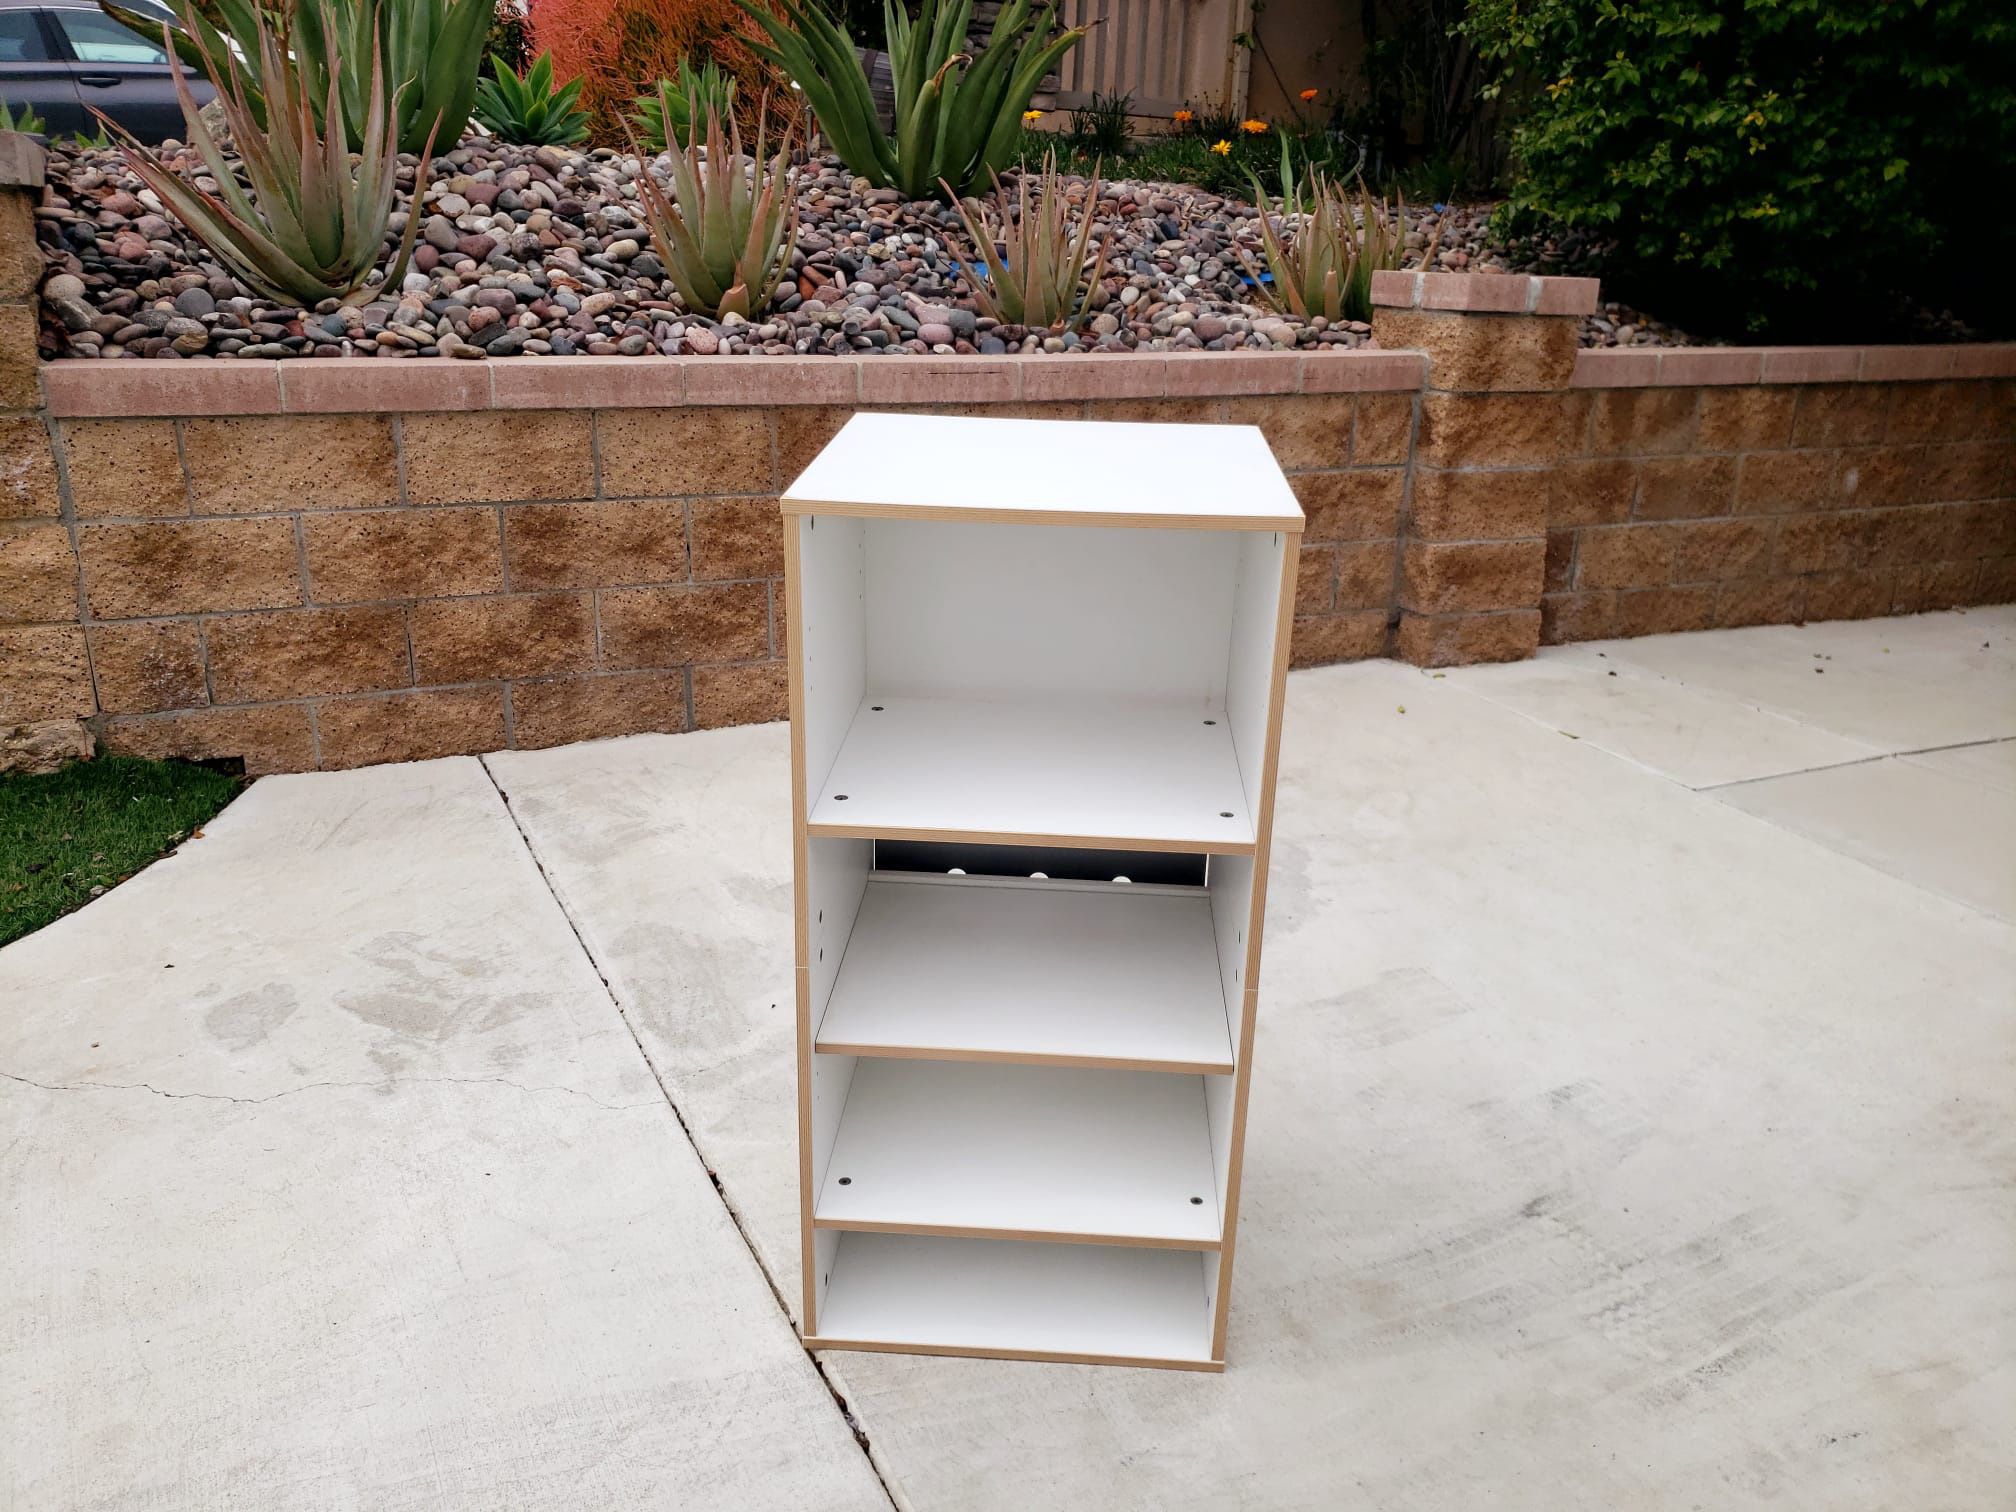 White Bookshelve - (40"H×20"W×20"D) - In Sturdy and Good Condition -